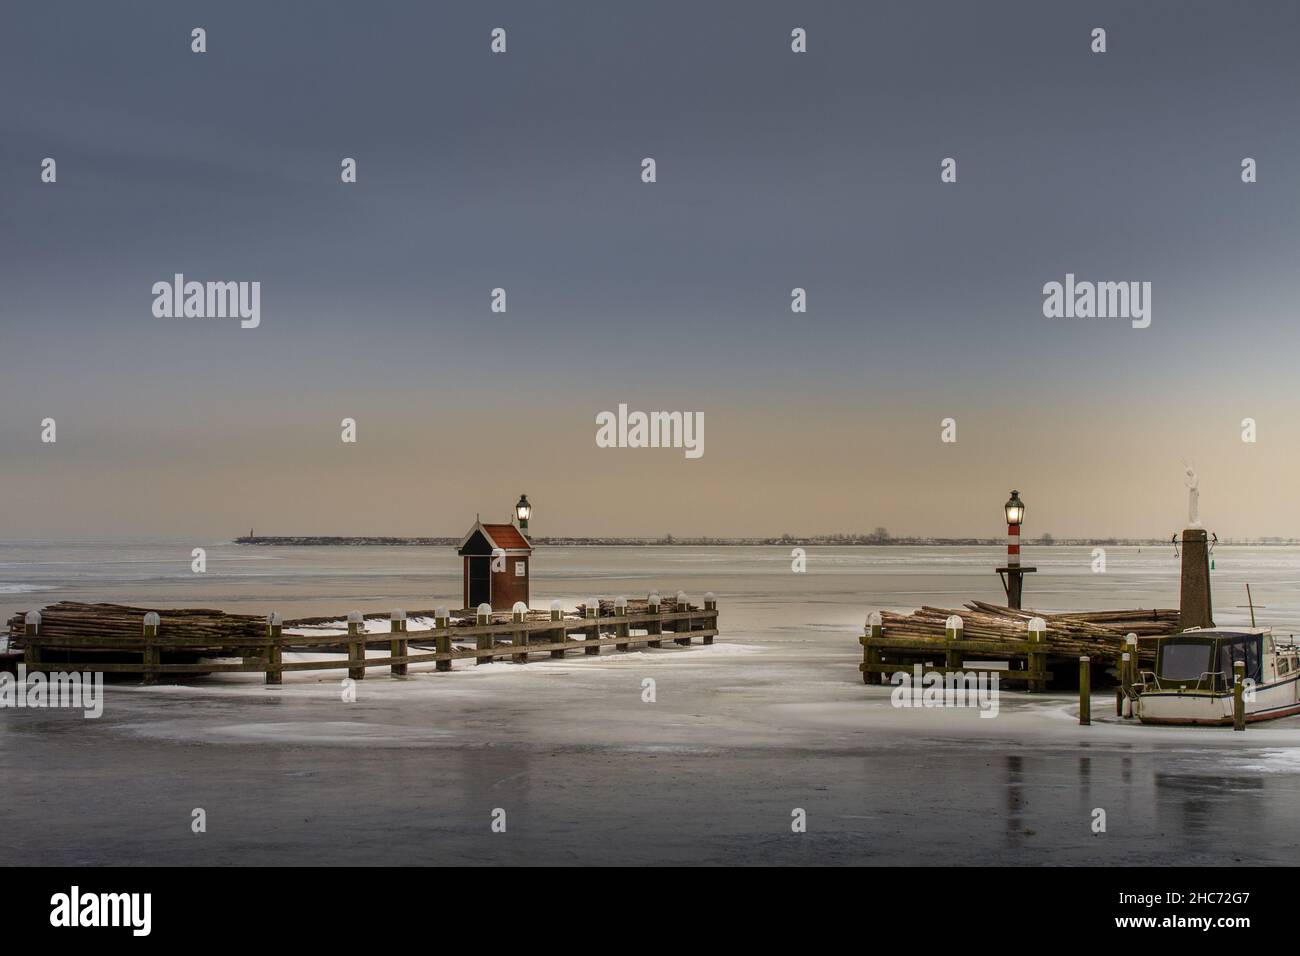 Landscape scenery of the frozen harbor of Volendam at sunset time Stock Photo